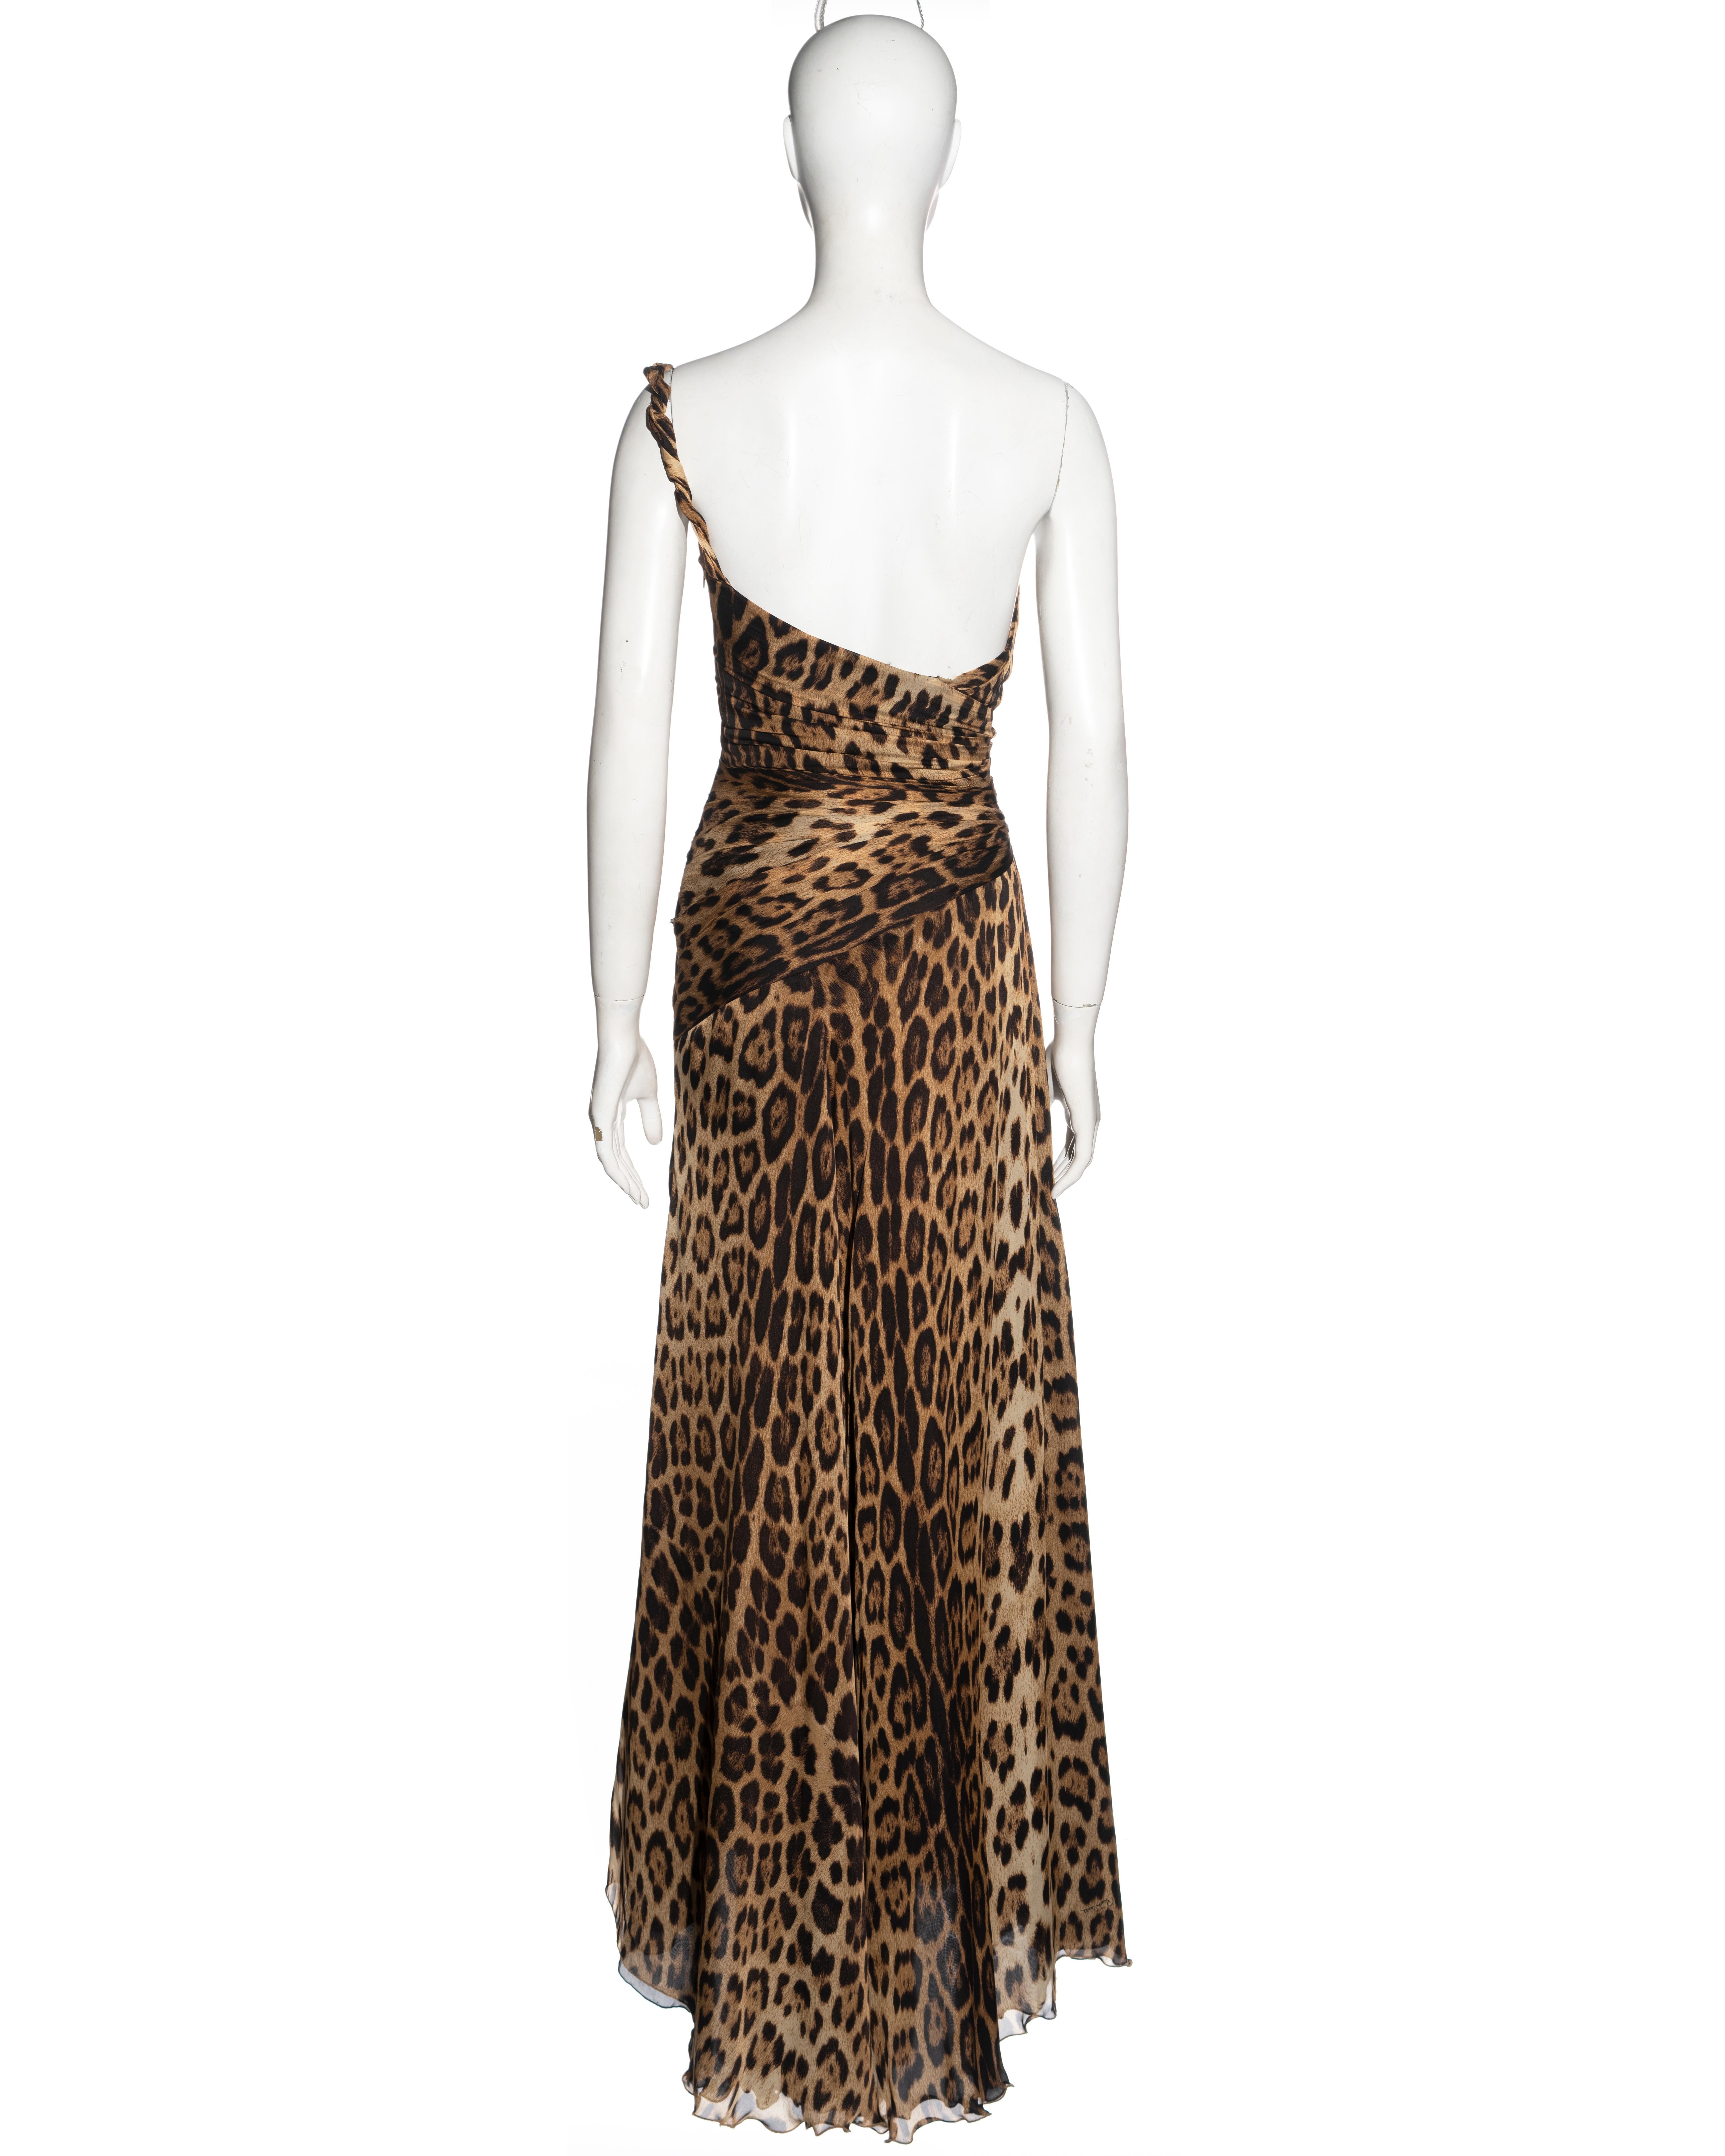 Roberto Cavalli leopard print silk evening dress with built-in corset, fw 2006 For Sale 2